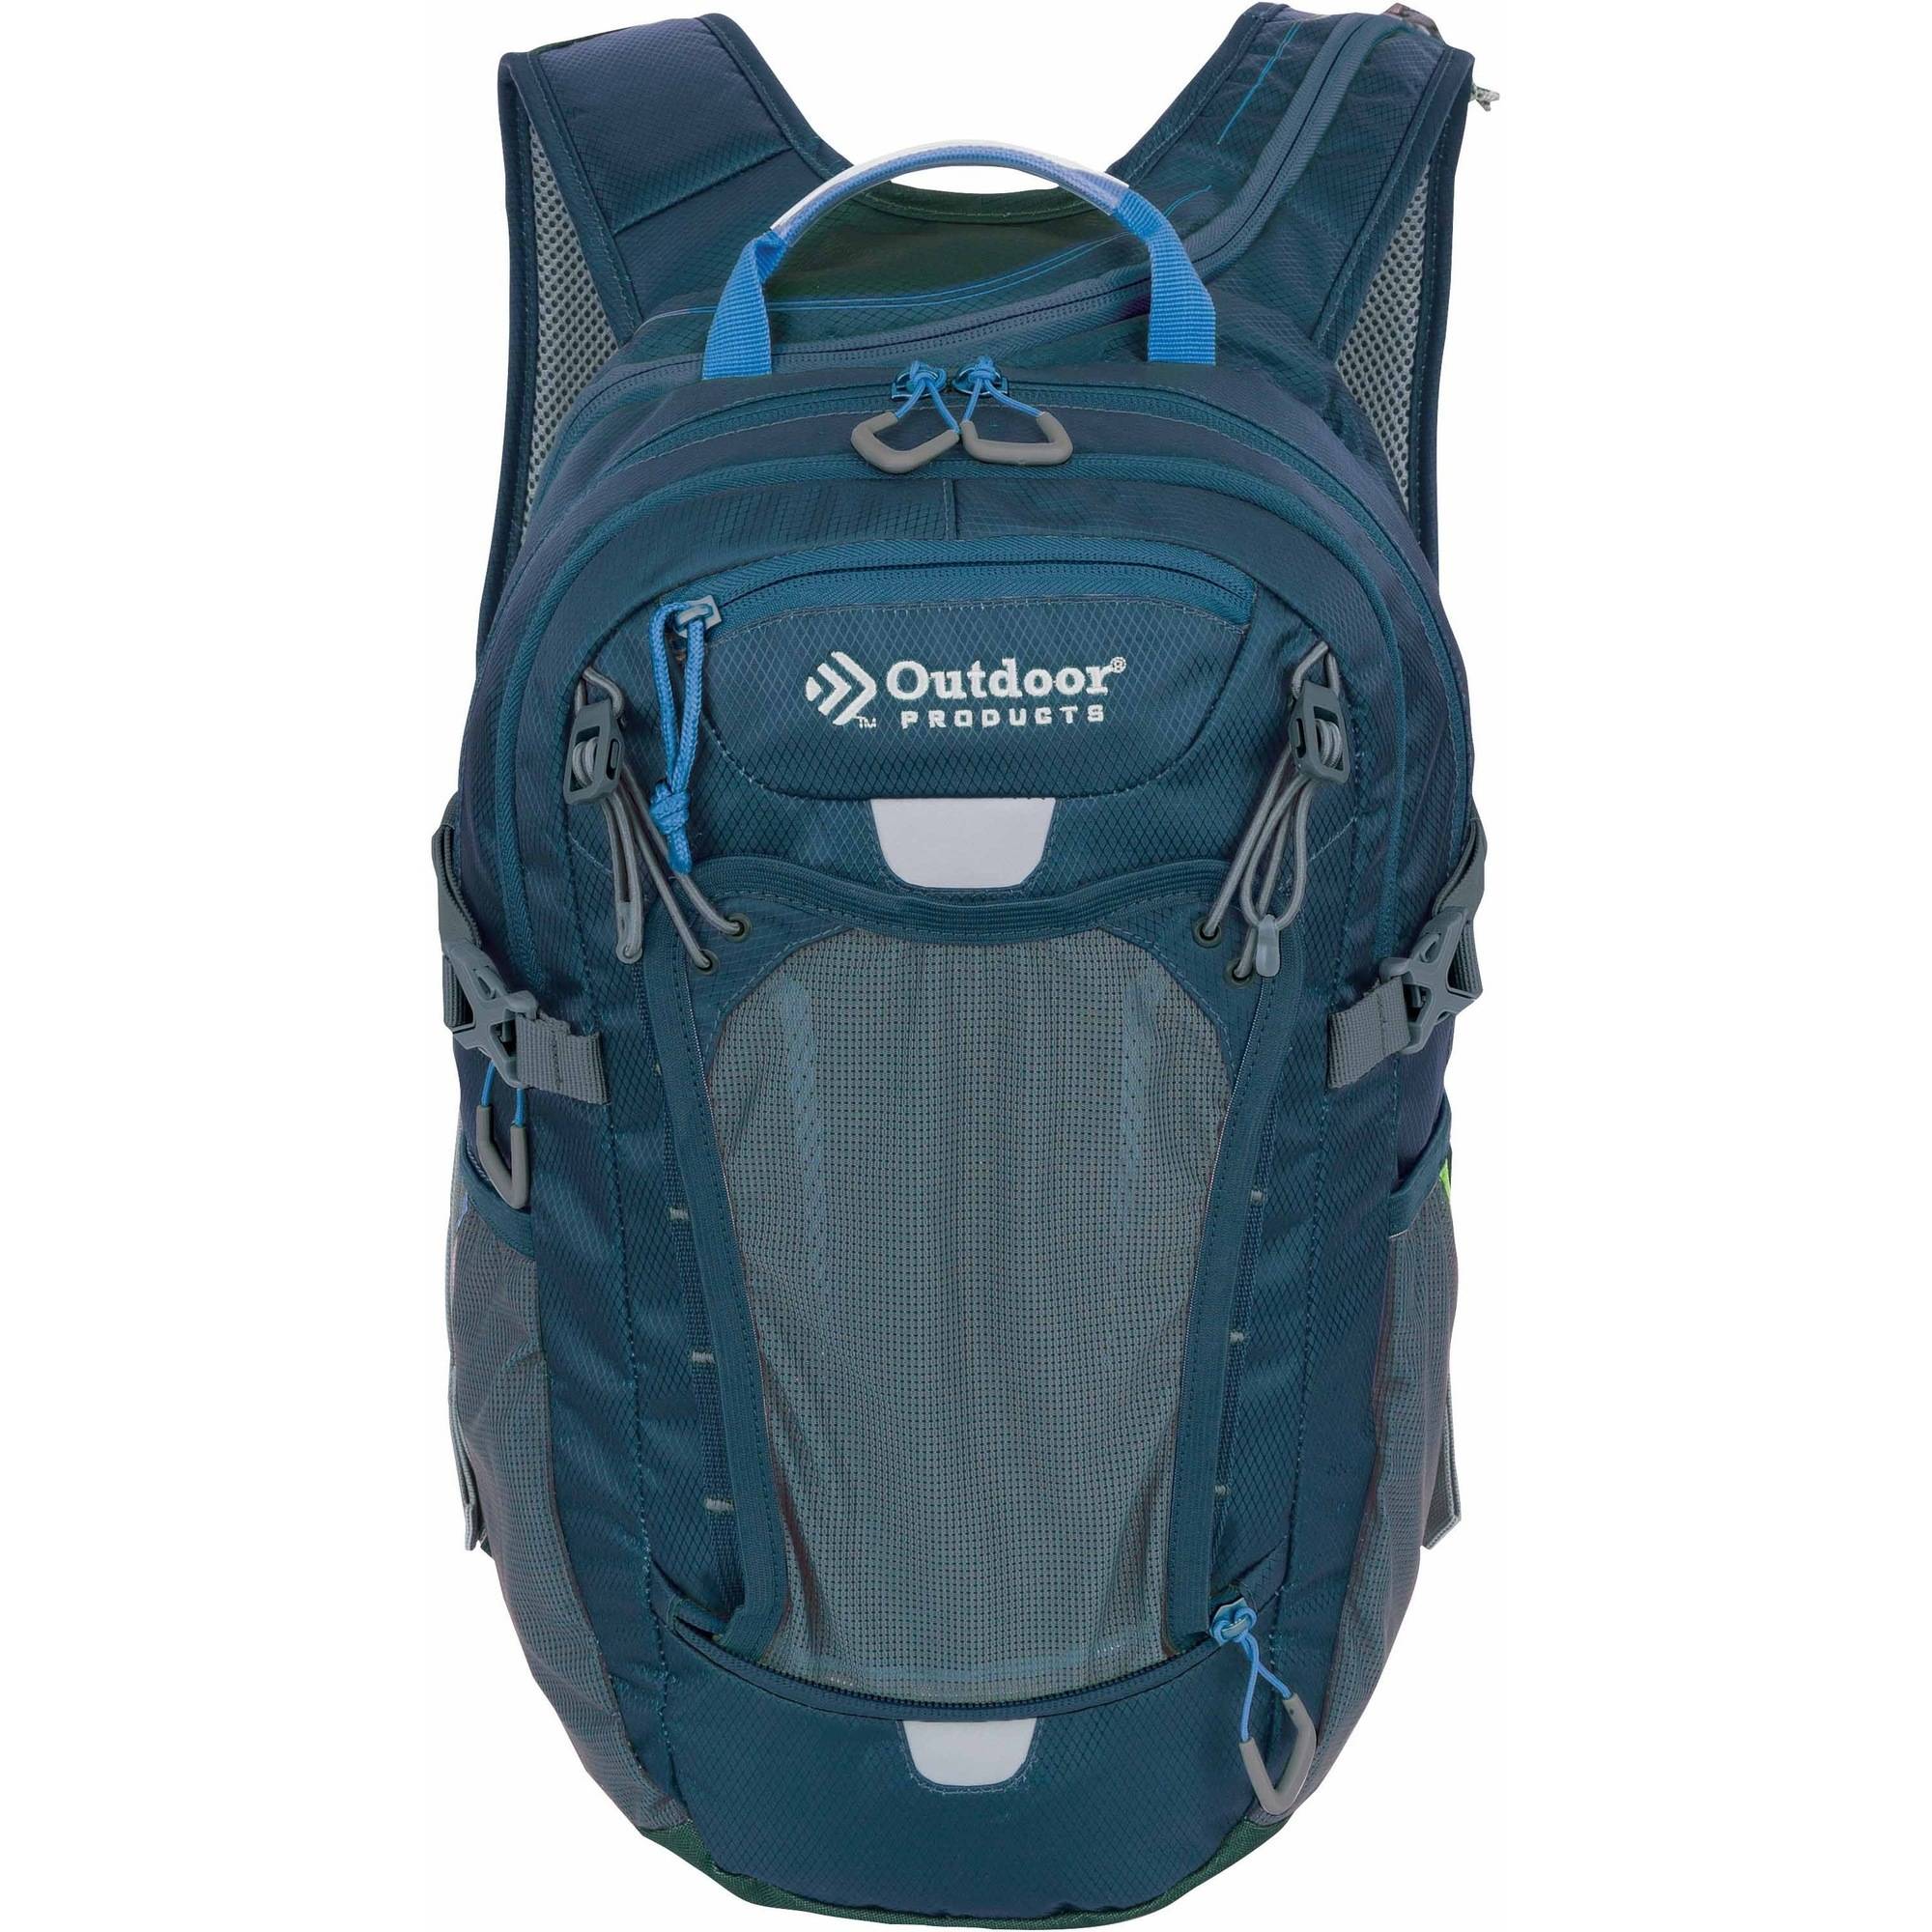 Outdoor Products Deluxe 17 Ltr Hydration Backpack with 2-Liter Reservoir, Deep Dive, Unisex - image 3 of 8